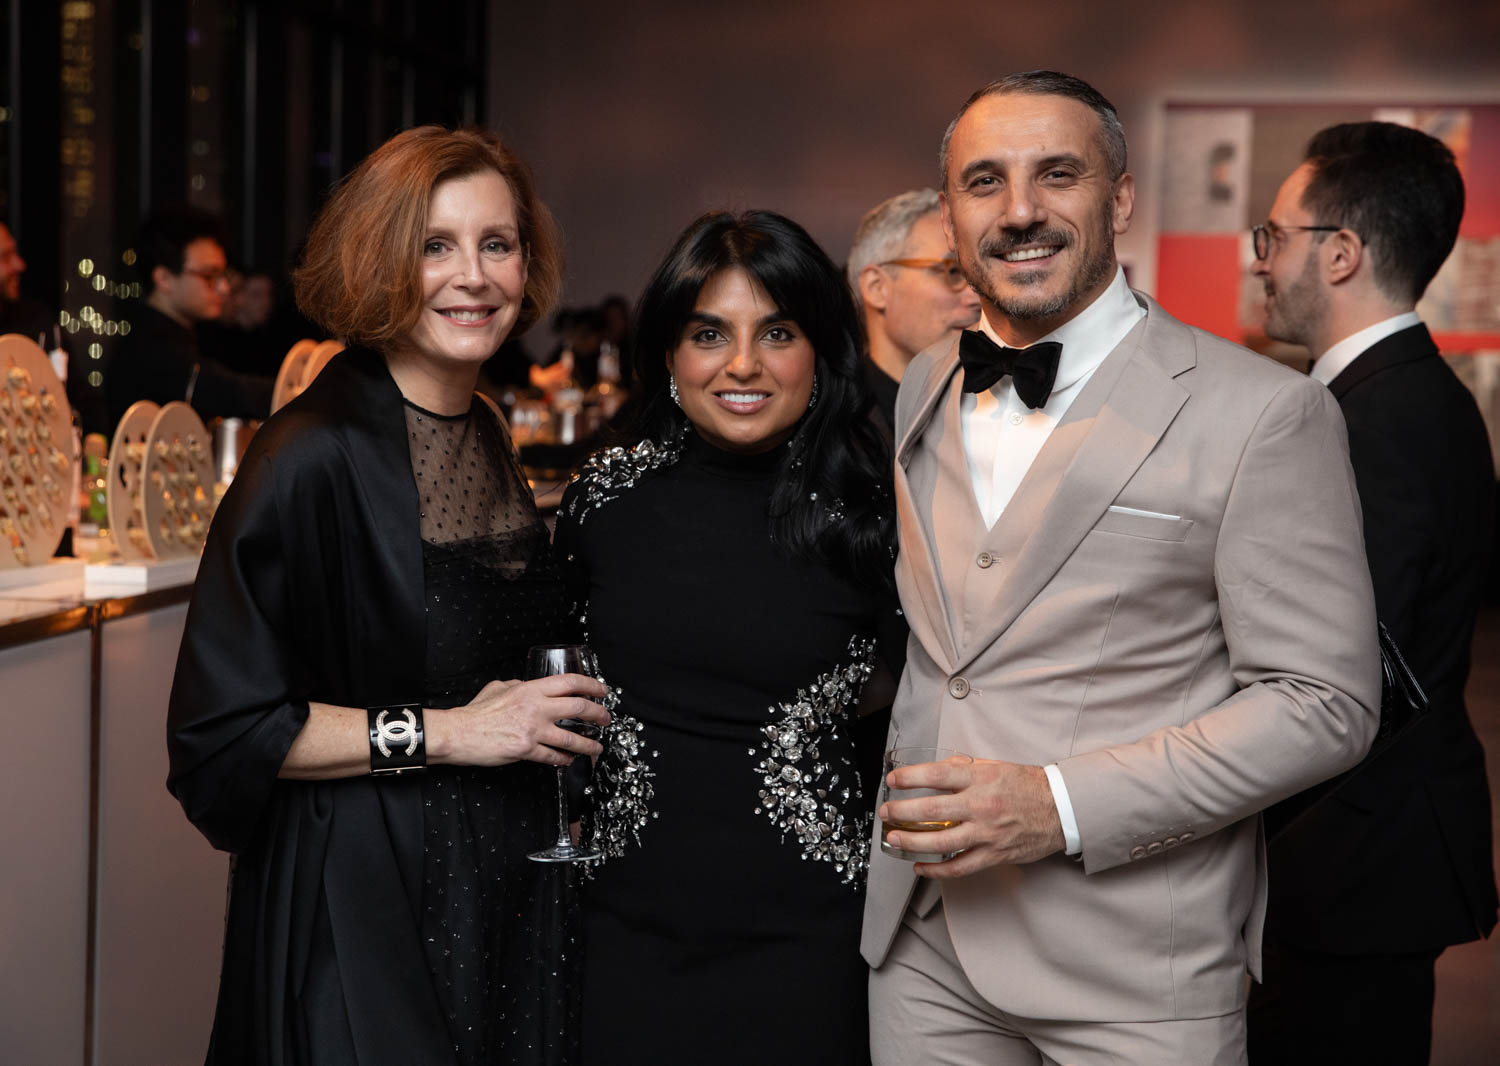 attendees at Interior Design's 2023 Hall of Fame gala